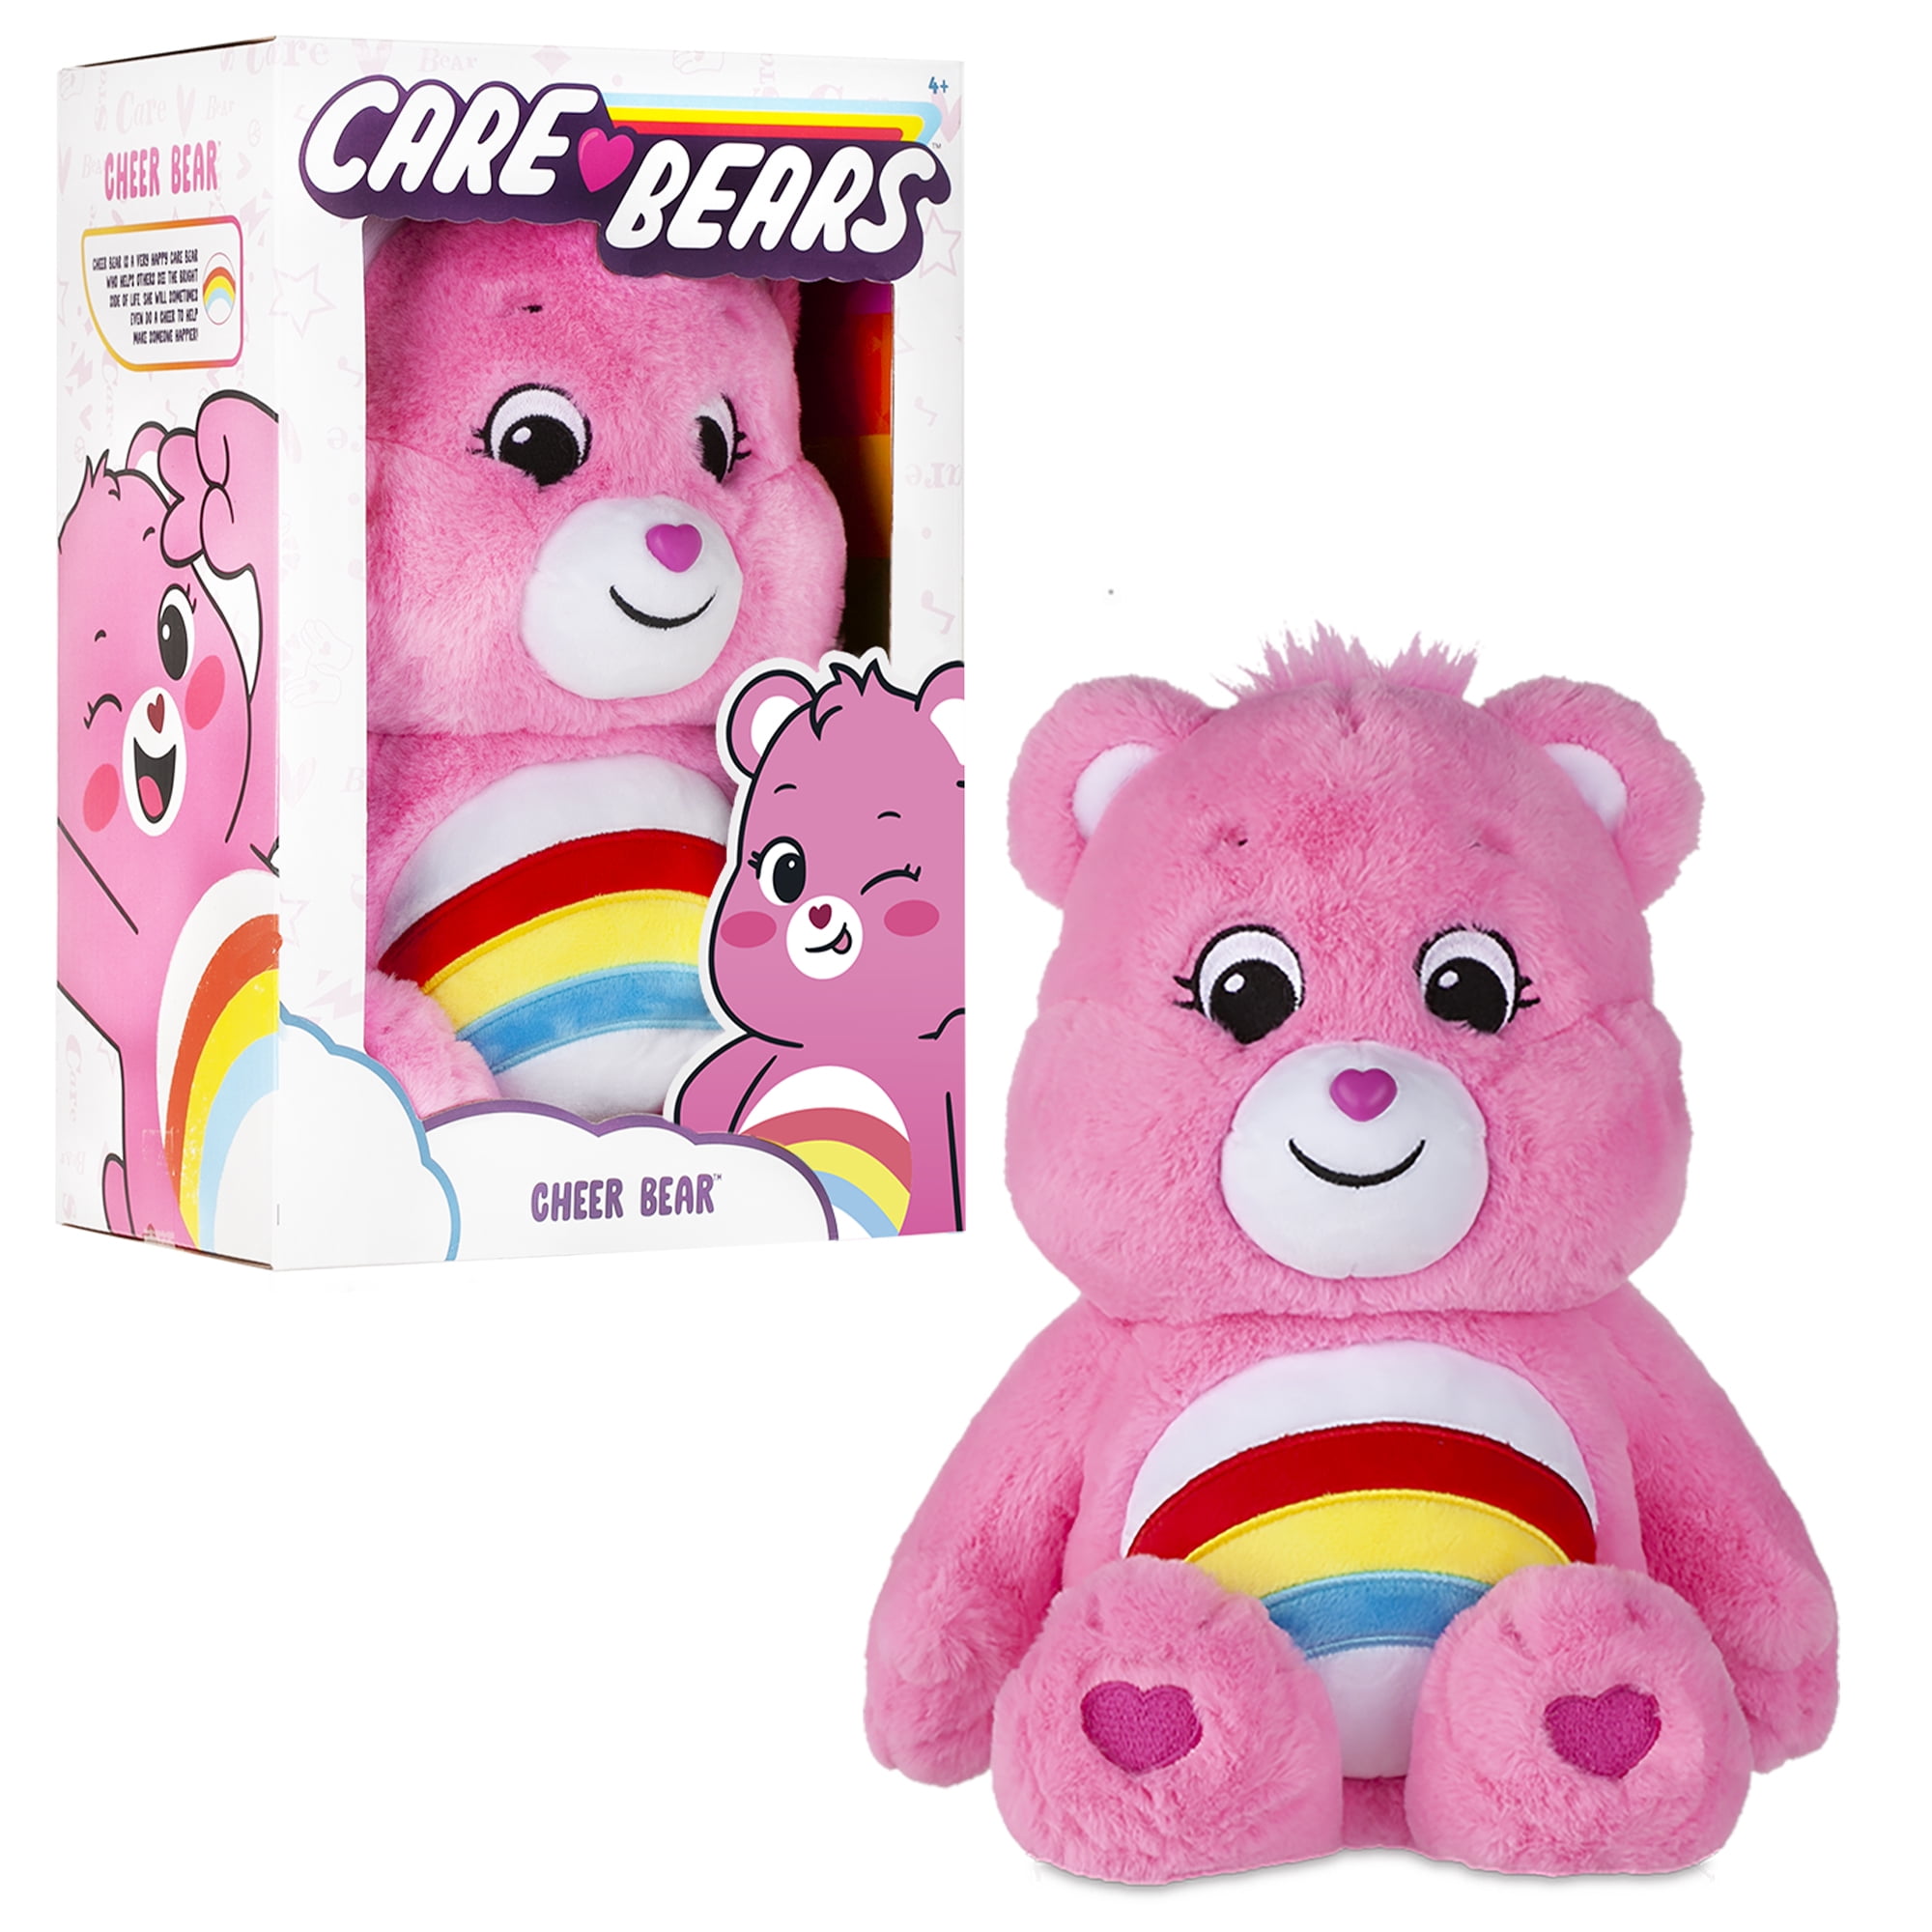 Care Bears Cheer Bear School Backpack 16" Large Pink Plush Bag with Ear 